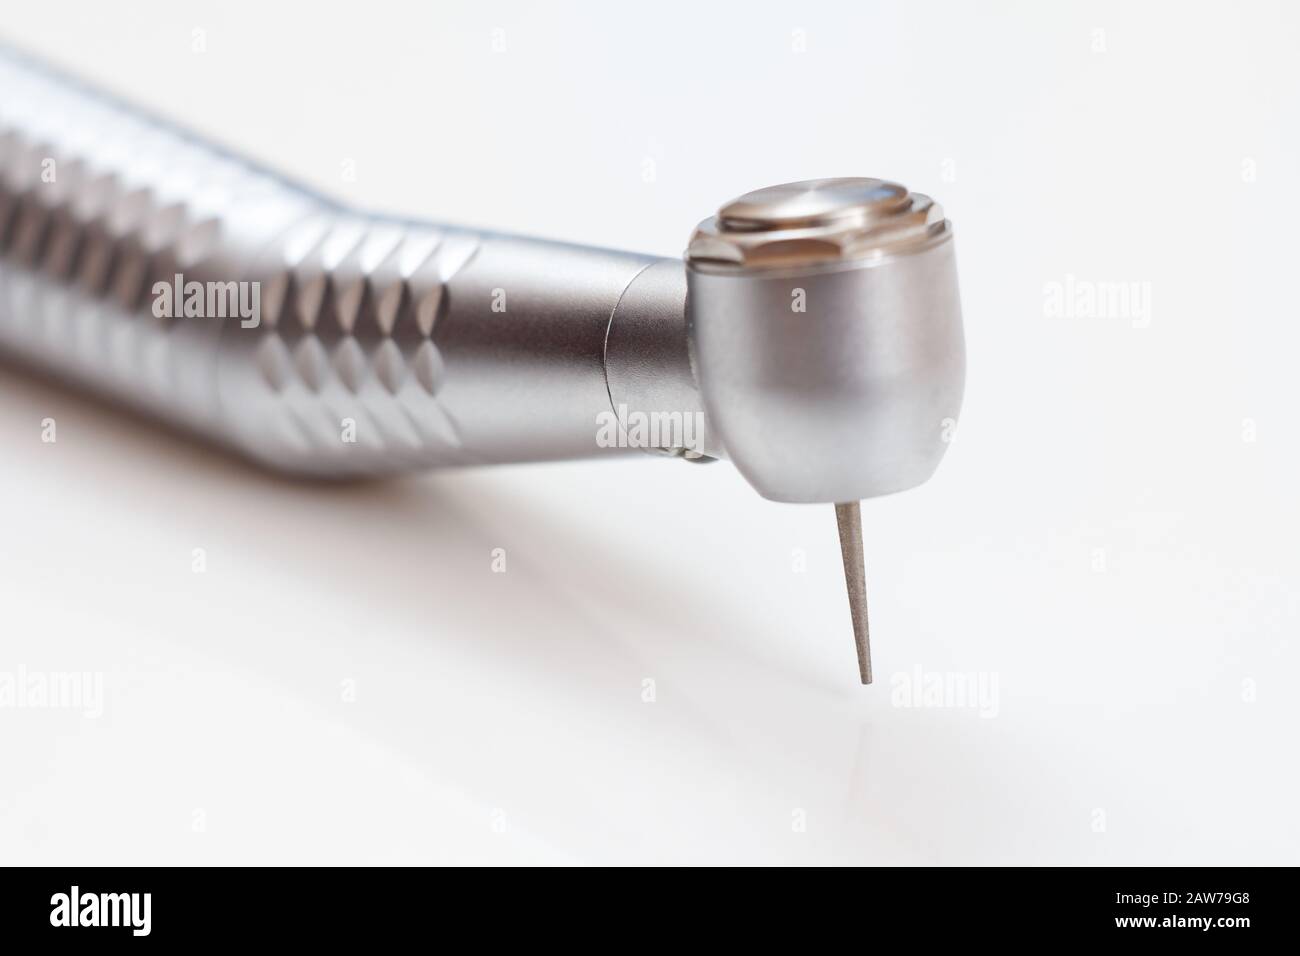 Head of high-speed dental handpiece with bur on white background. Dental instruments for dental treatment. Medical tools. Close-up view. Shallow depth Stock Photo